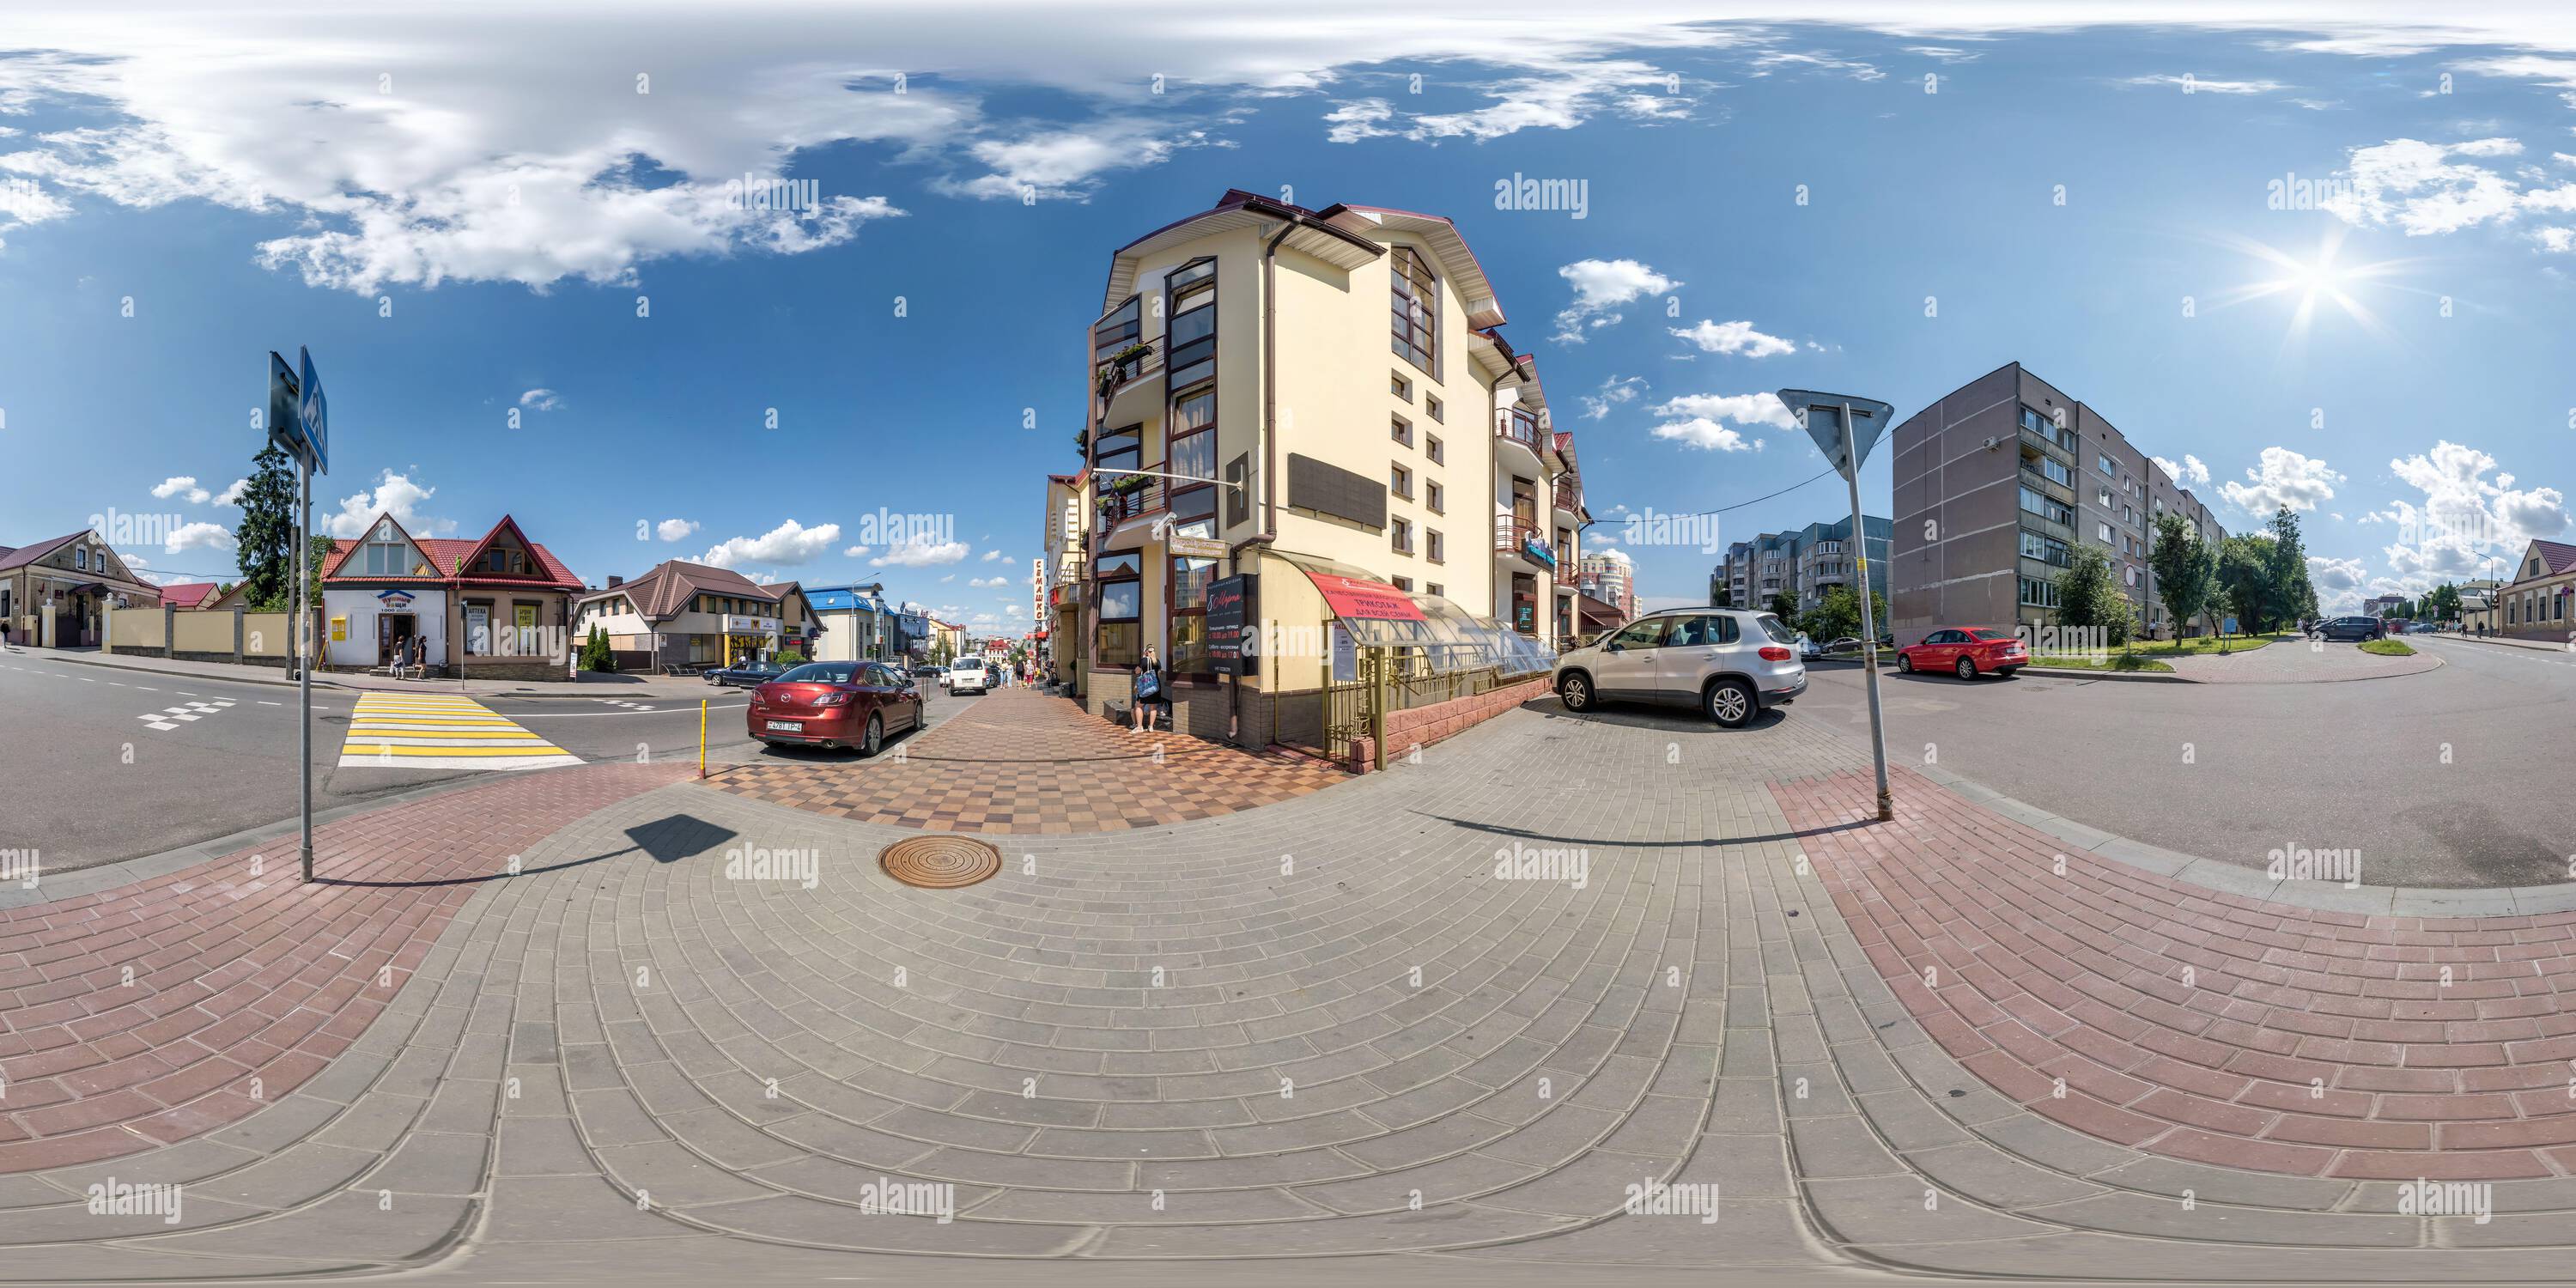 360 degree panoramic view of GRODNO, BELARUS - MAY 2021: full seamless spherical hdr 360 panorama on crossroads street near multistory building area of urban development in sunny